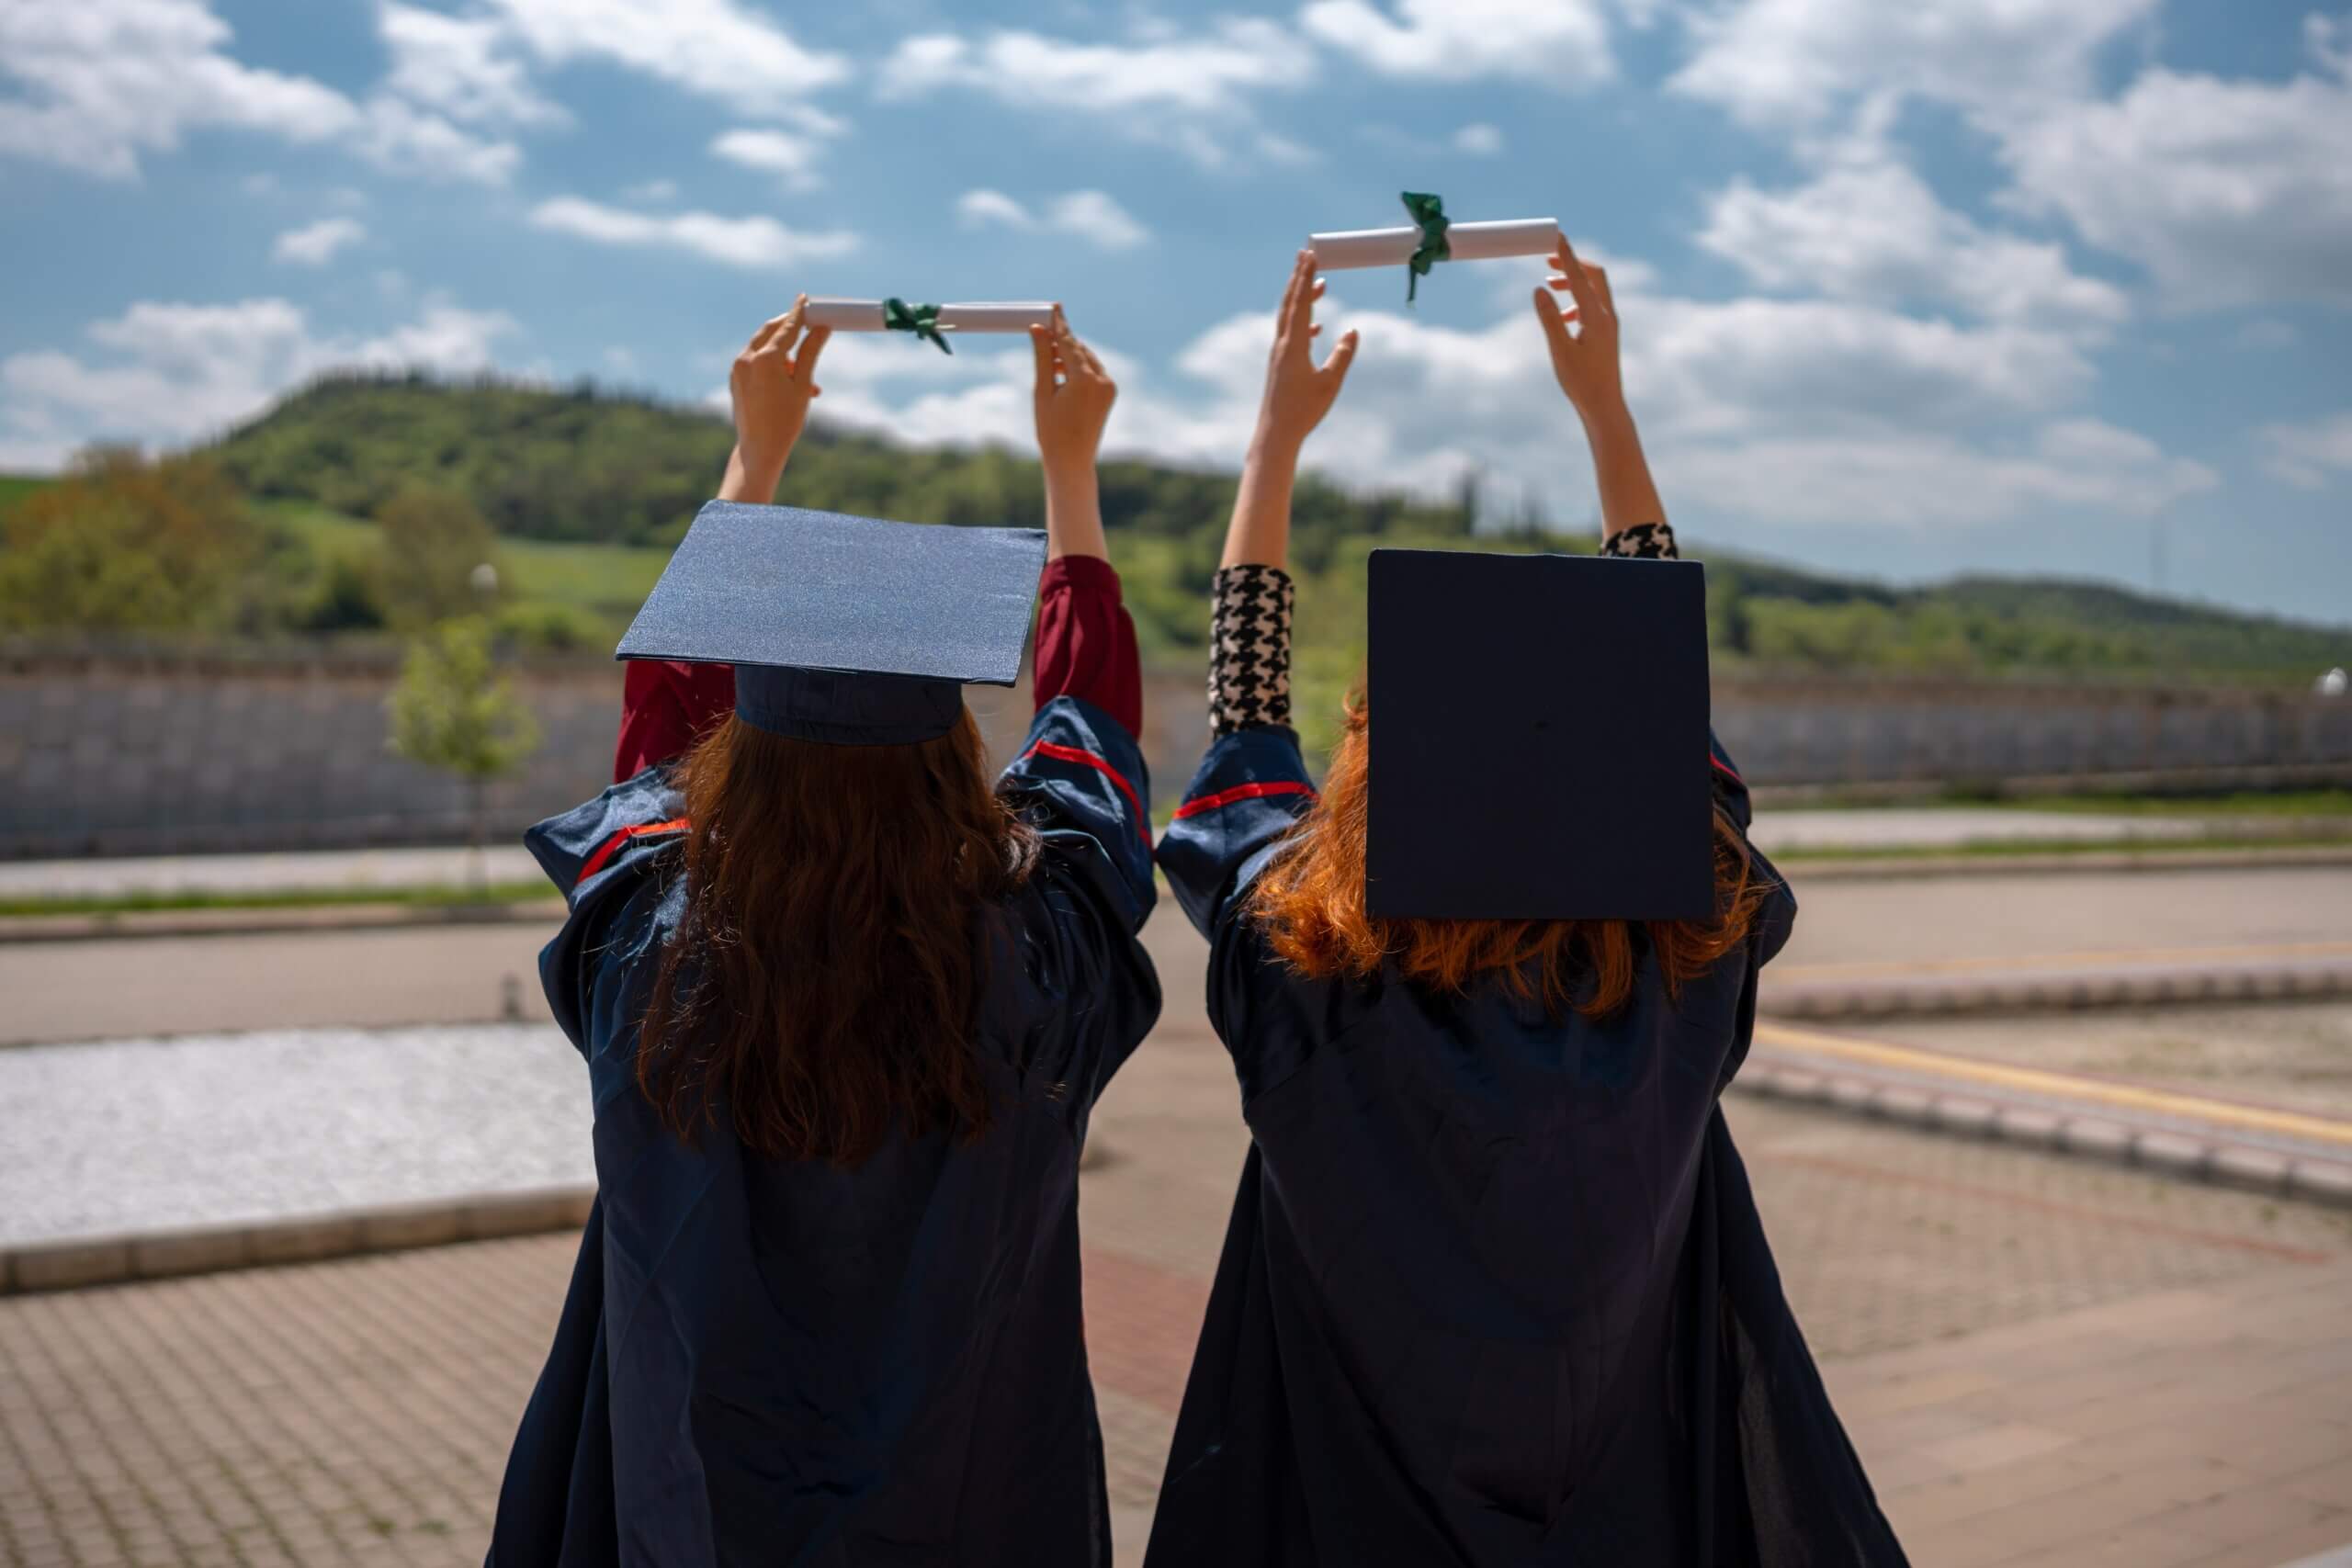 Two students holding up diplomas in graduation gowns